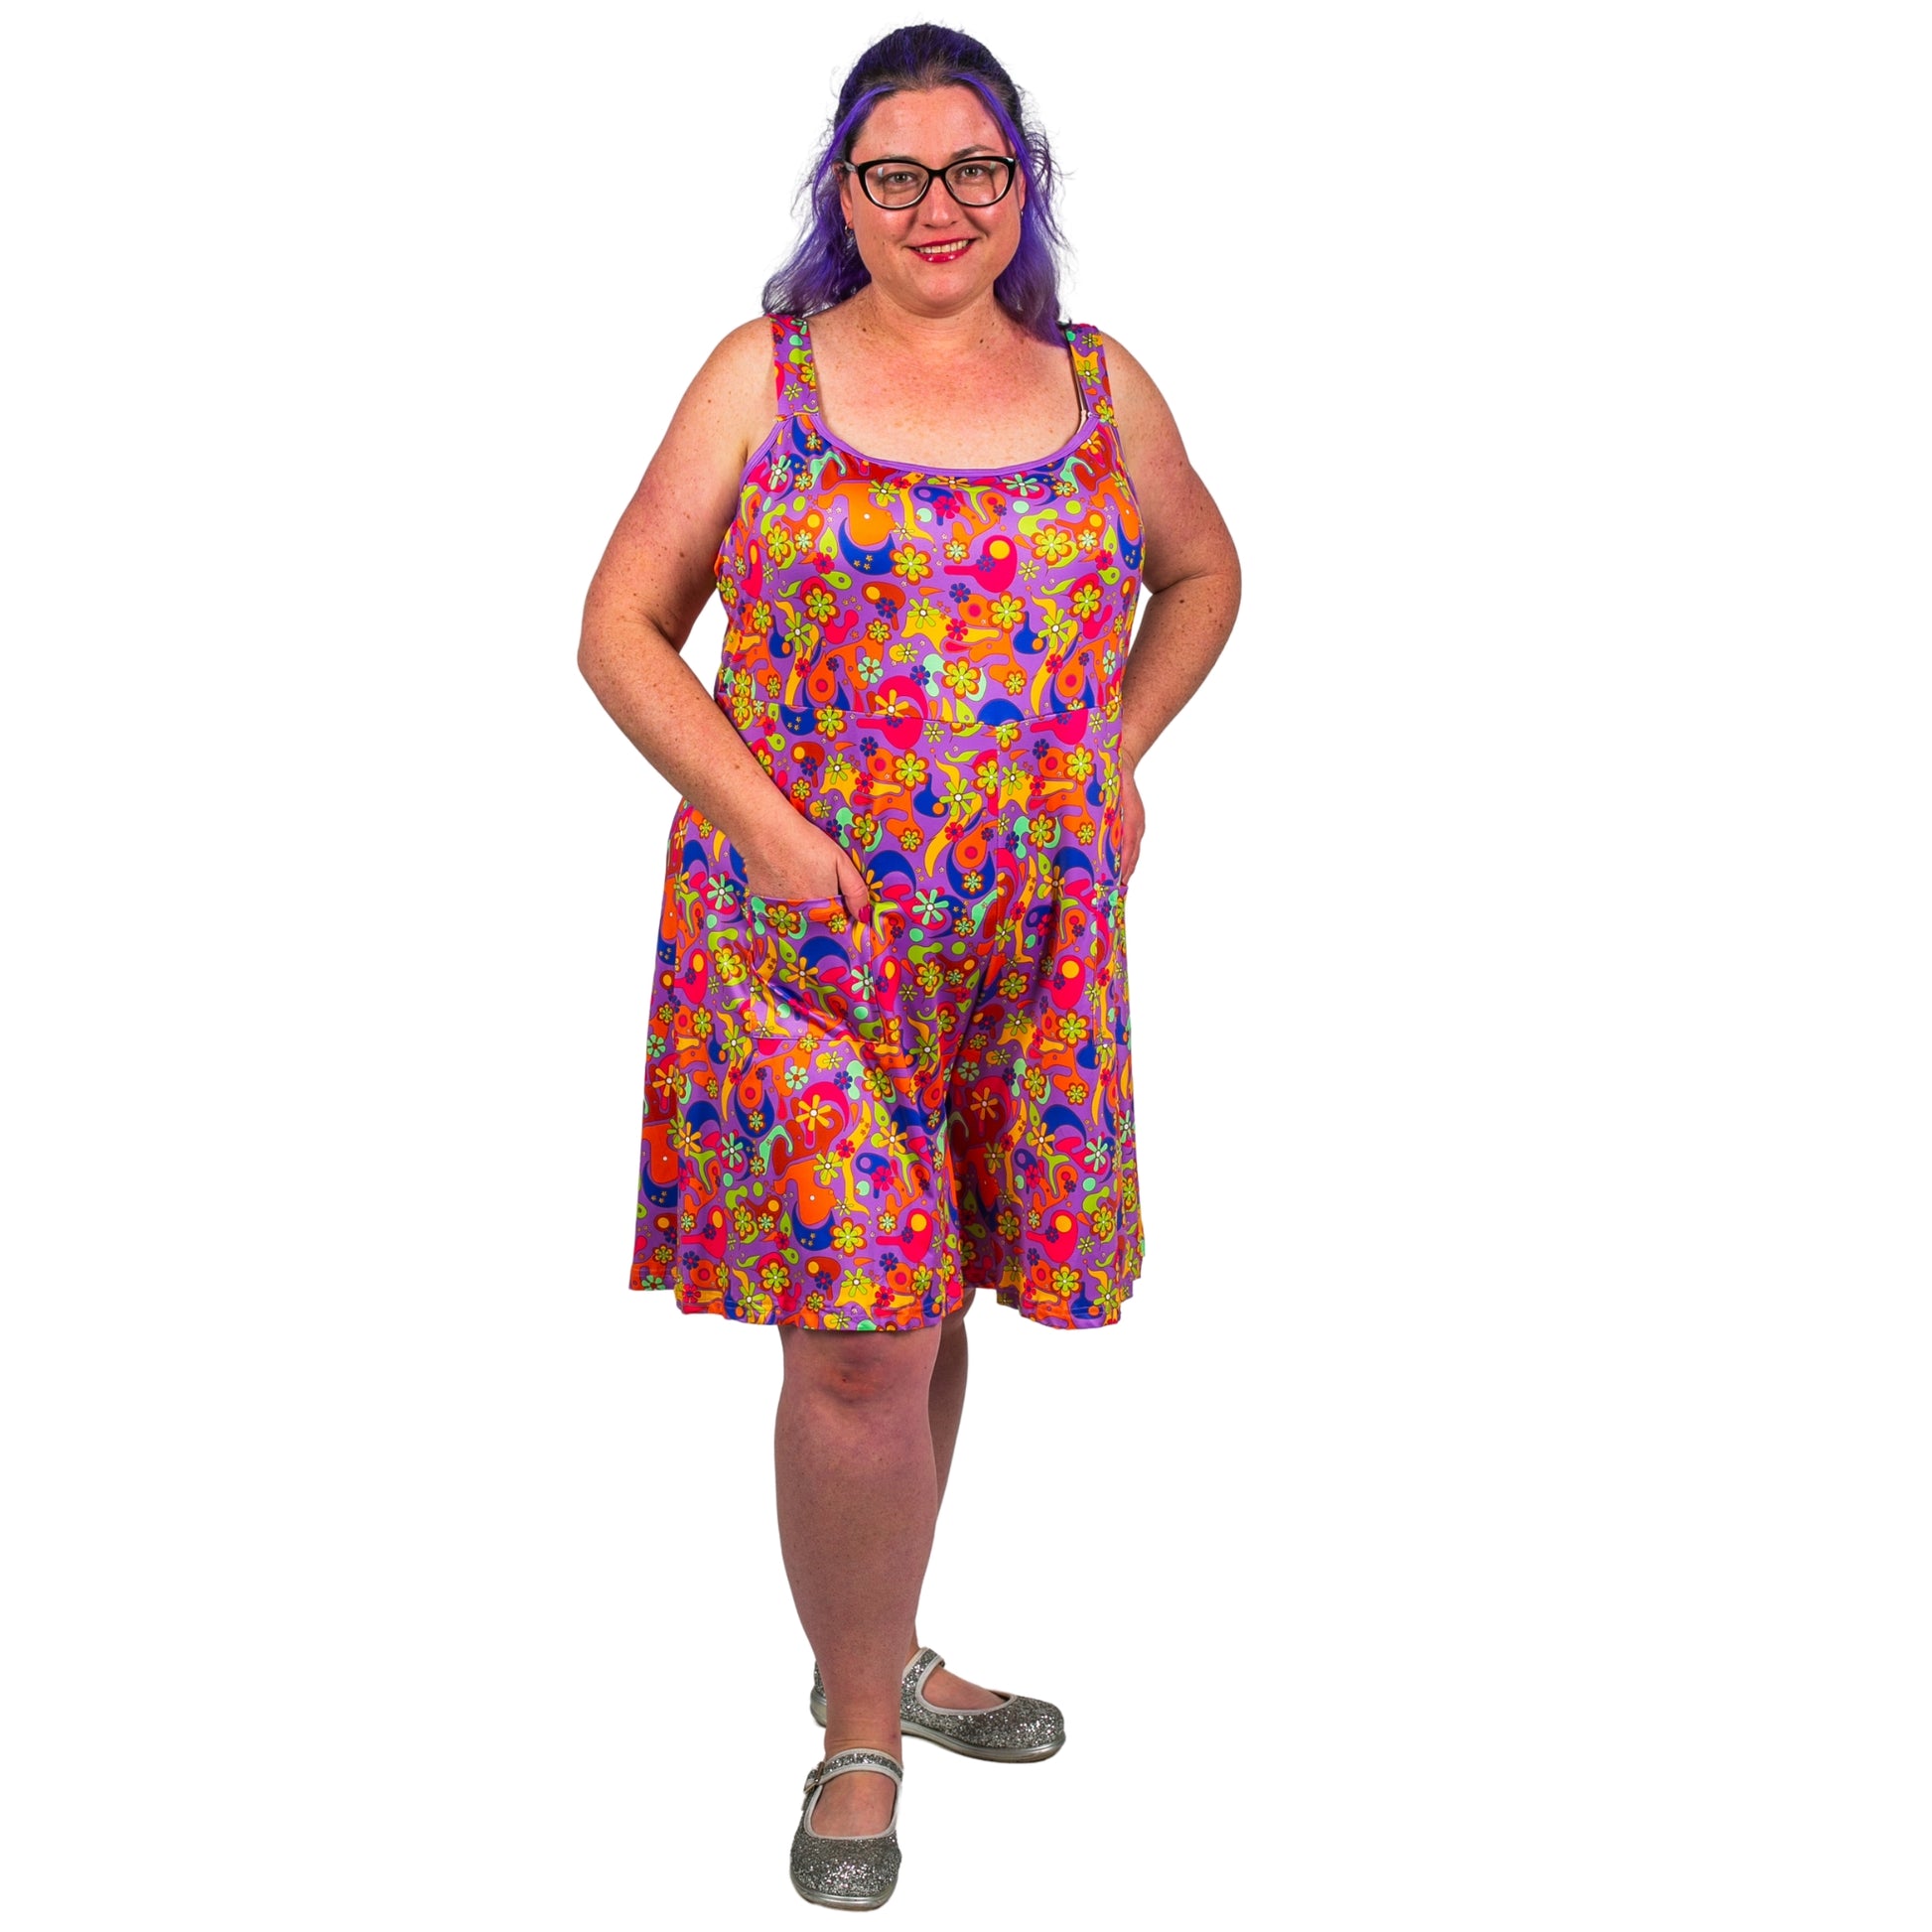 Flower Power Romper by RainbowsAndFairies.com.au (Psychedelic - Woodstock - Floral - Playsuit - Shorts - Kitsch - Rockabilly) - SKU: CL_ROMPR_FLOPO_ORG - Pic-05